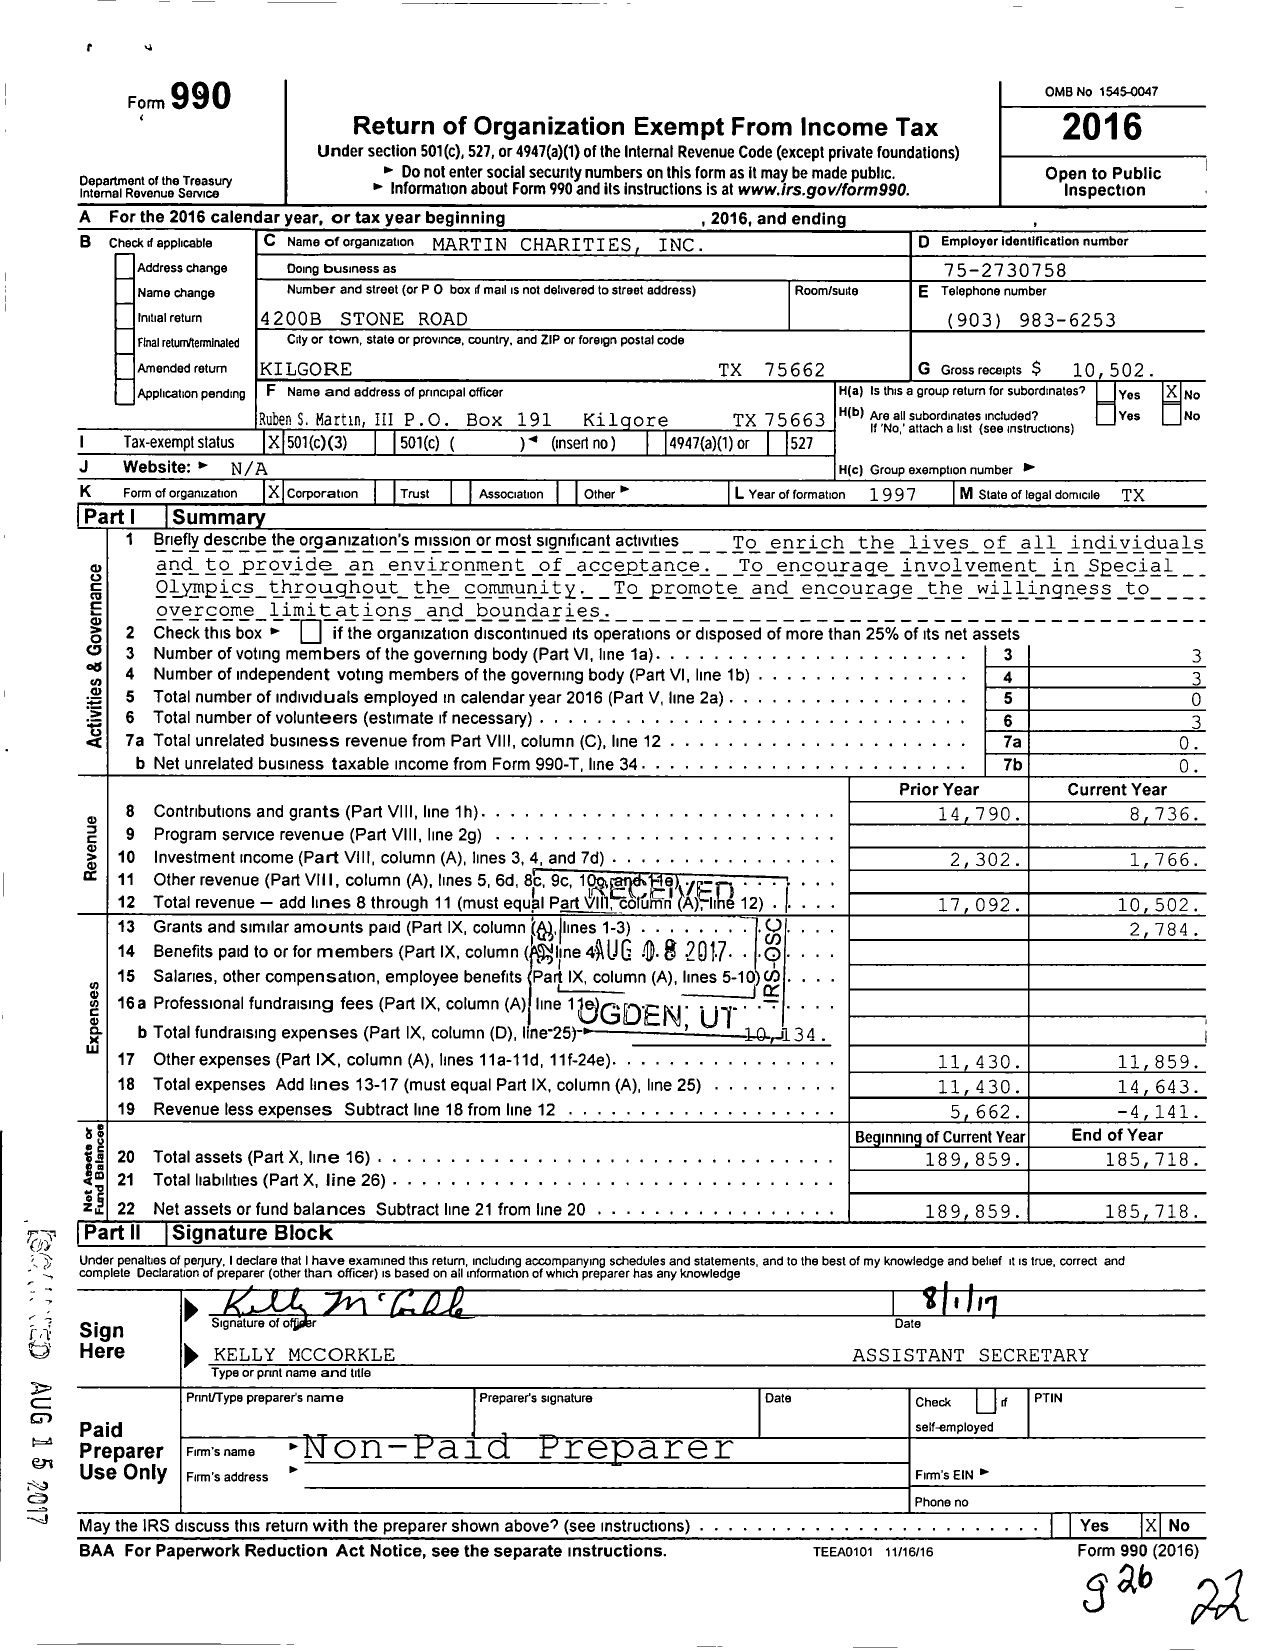 Image of first page of 2016 Form 990 for Martin Charities